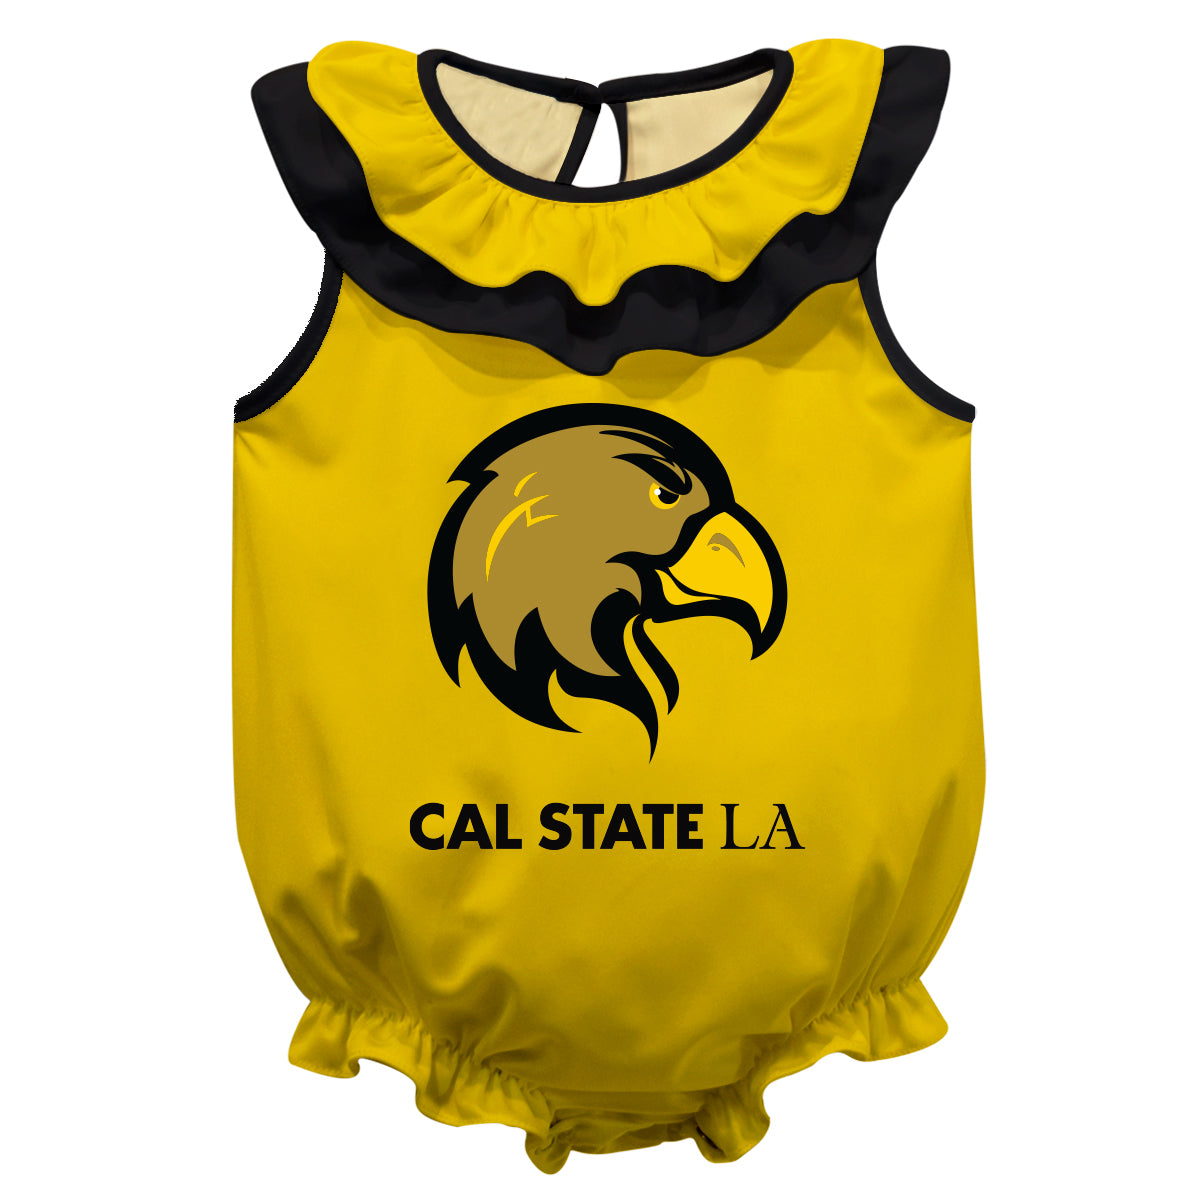 Cal State Los Angeles Golden Eagles Gold Sleeveless Ruffle One Piece Jumpsuit Logo Bodysuit by Vive La Fete